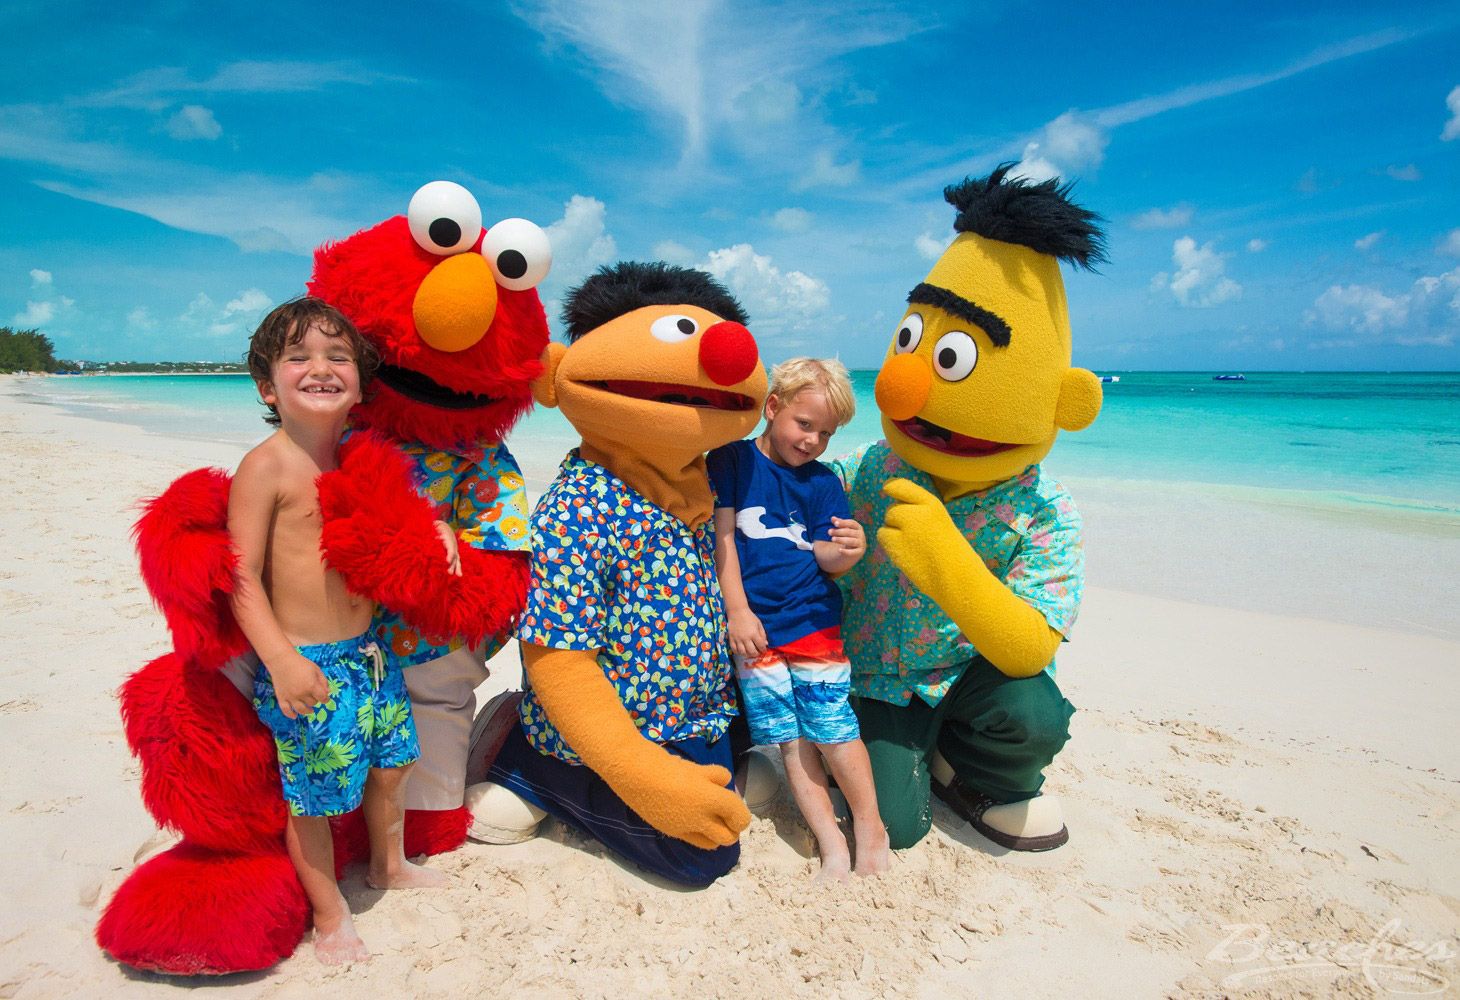 Beaches® Resorts by Sandals®: All-Inclusive For Families